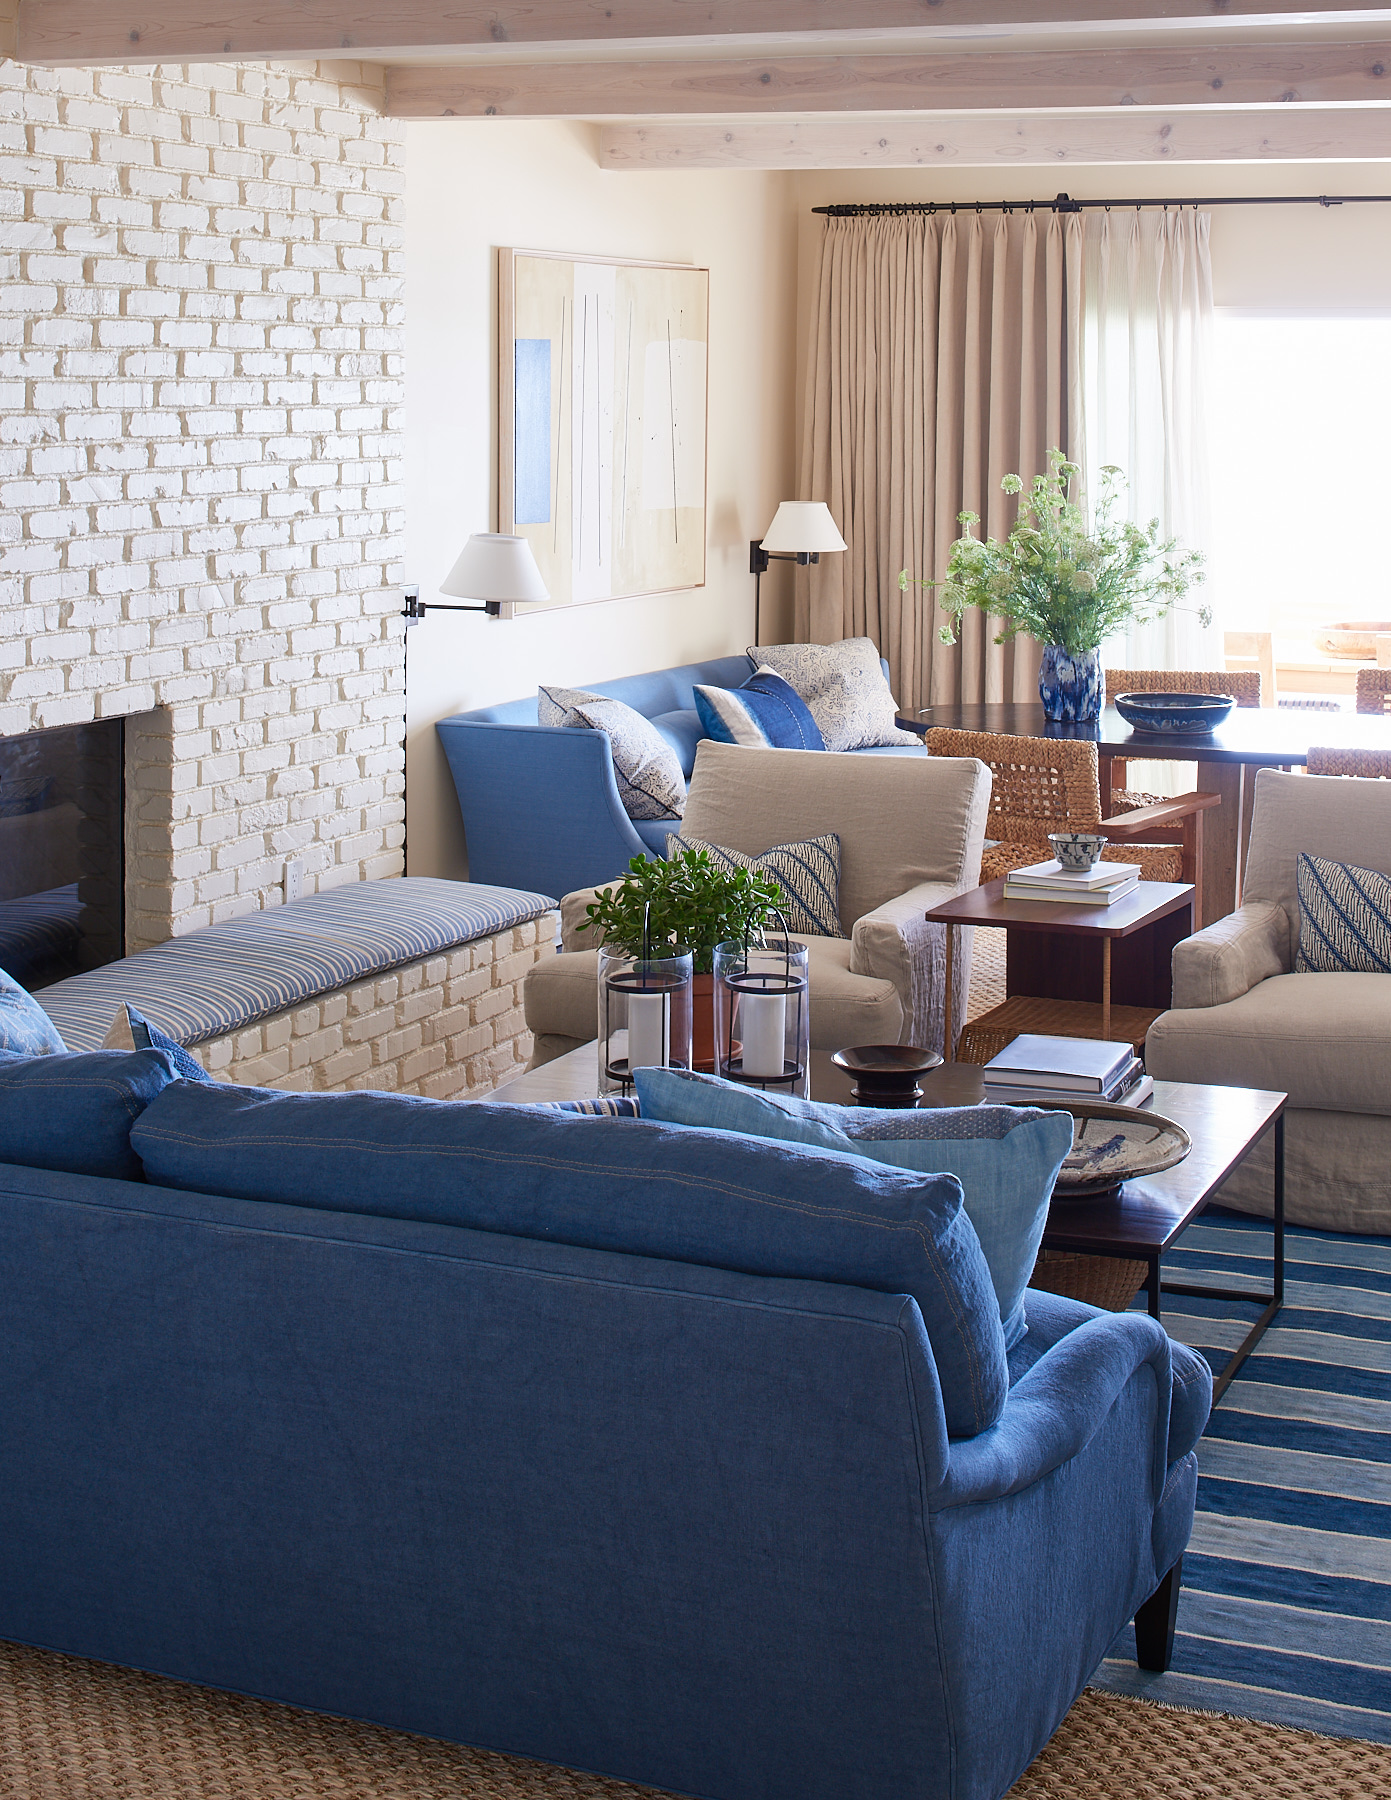 Beige linen club chairs, denim-style sofa, and horizontal-tufted settee.